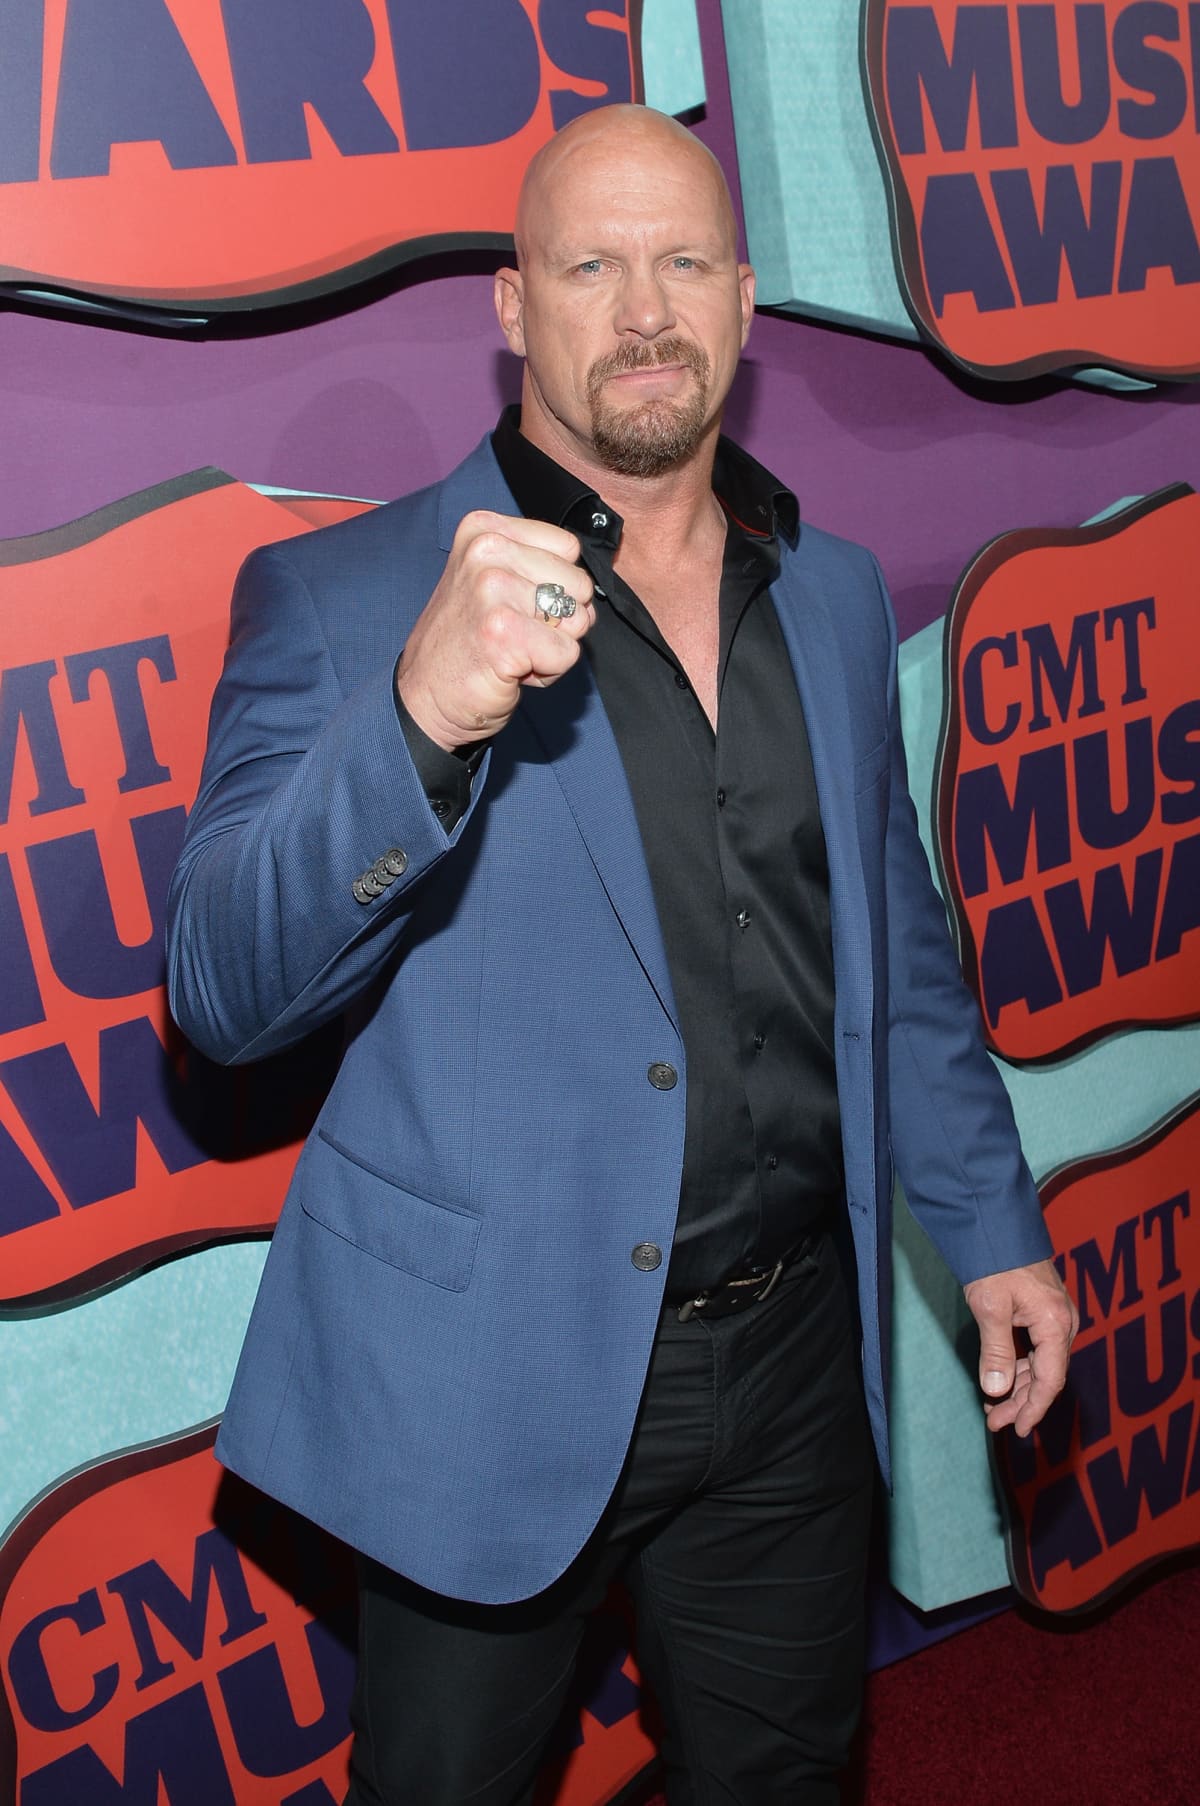 NASHVILLE, TN - JUNE 04:  Stone Cold Steve Austin attends the 2014 CMT Music awards at the Bridgestone Arena on June 4, 2014 in Nashville, Tennessee.  (Photo by Larry Busacca/WireImage)